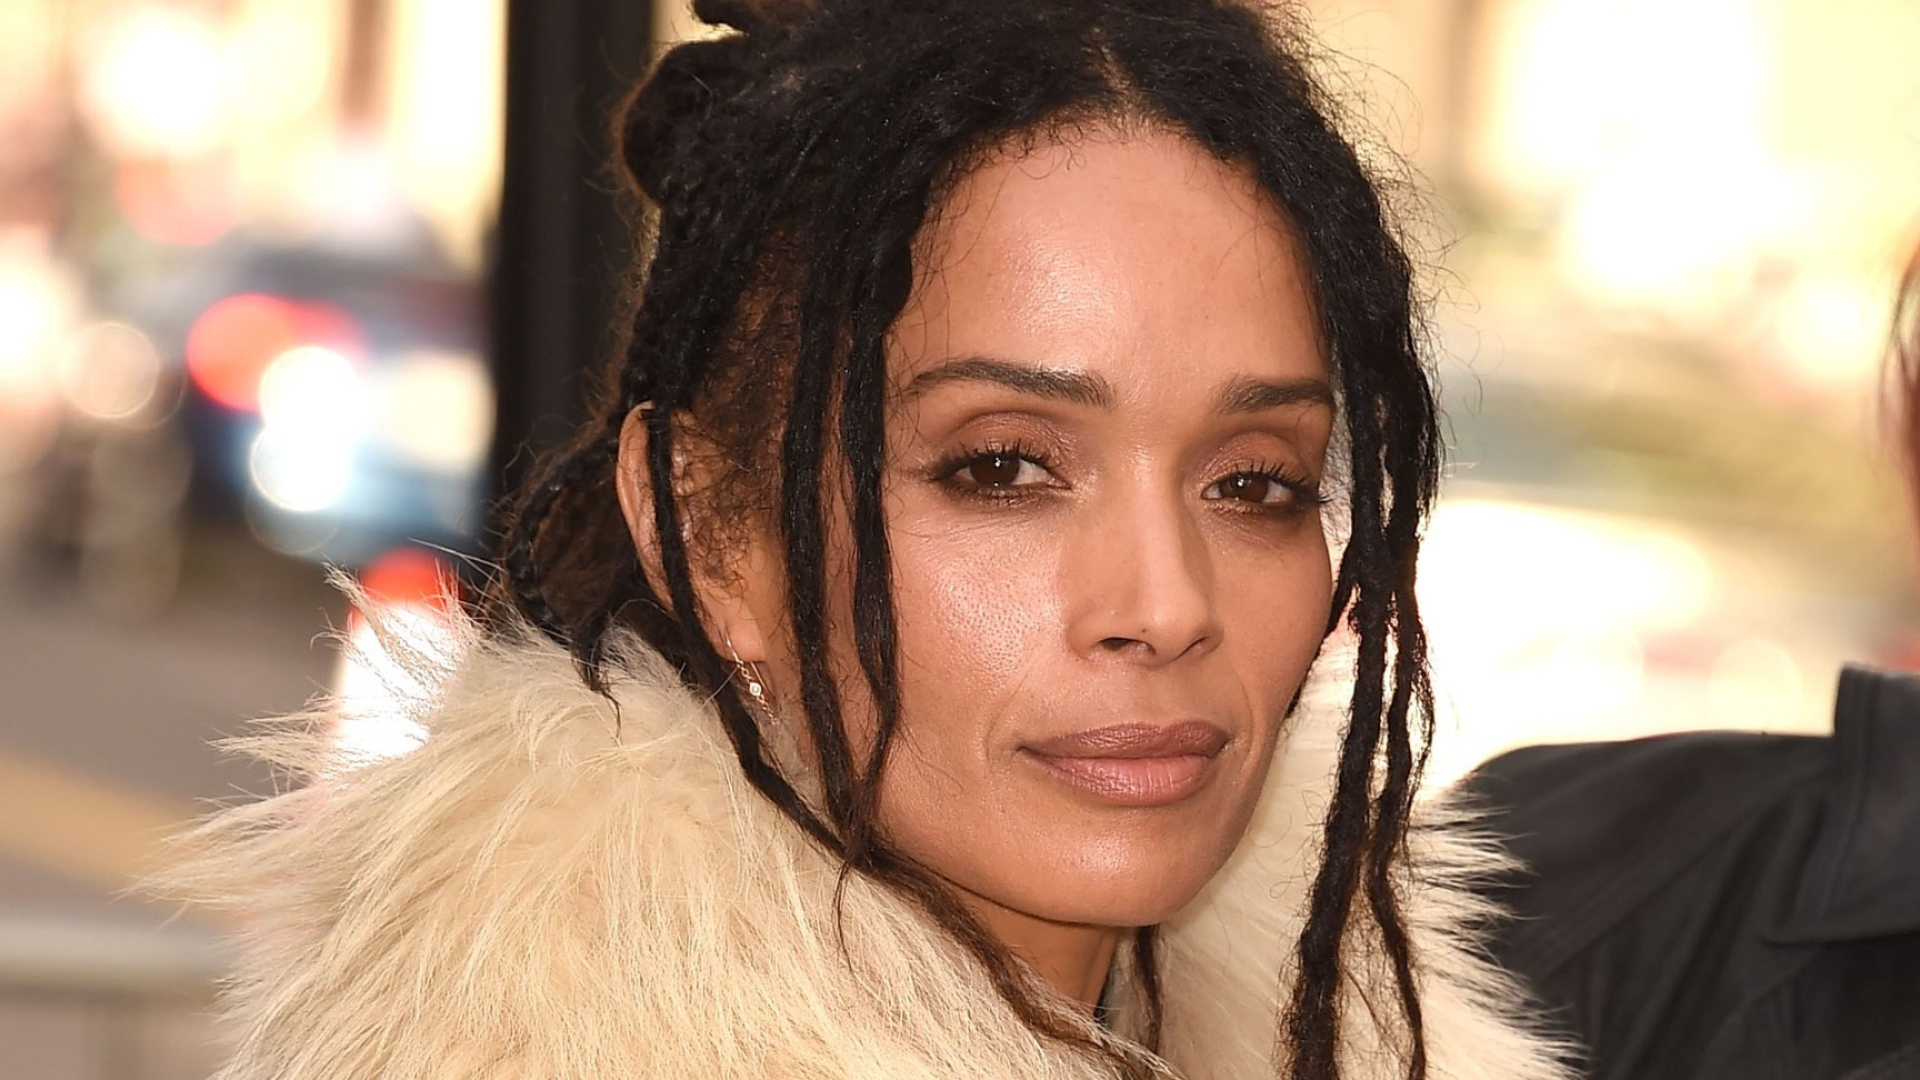 Lisa Bonet: Played Sky Van Der Veen in an American drama television series, The Red Road. 1920x1080 Full HD Background.